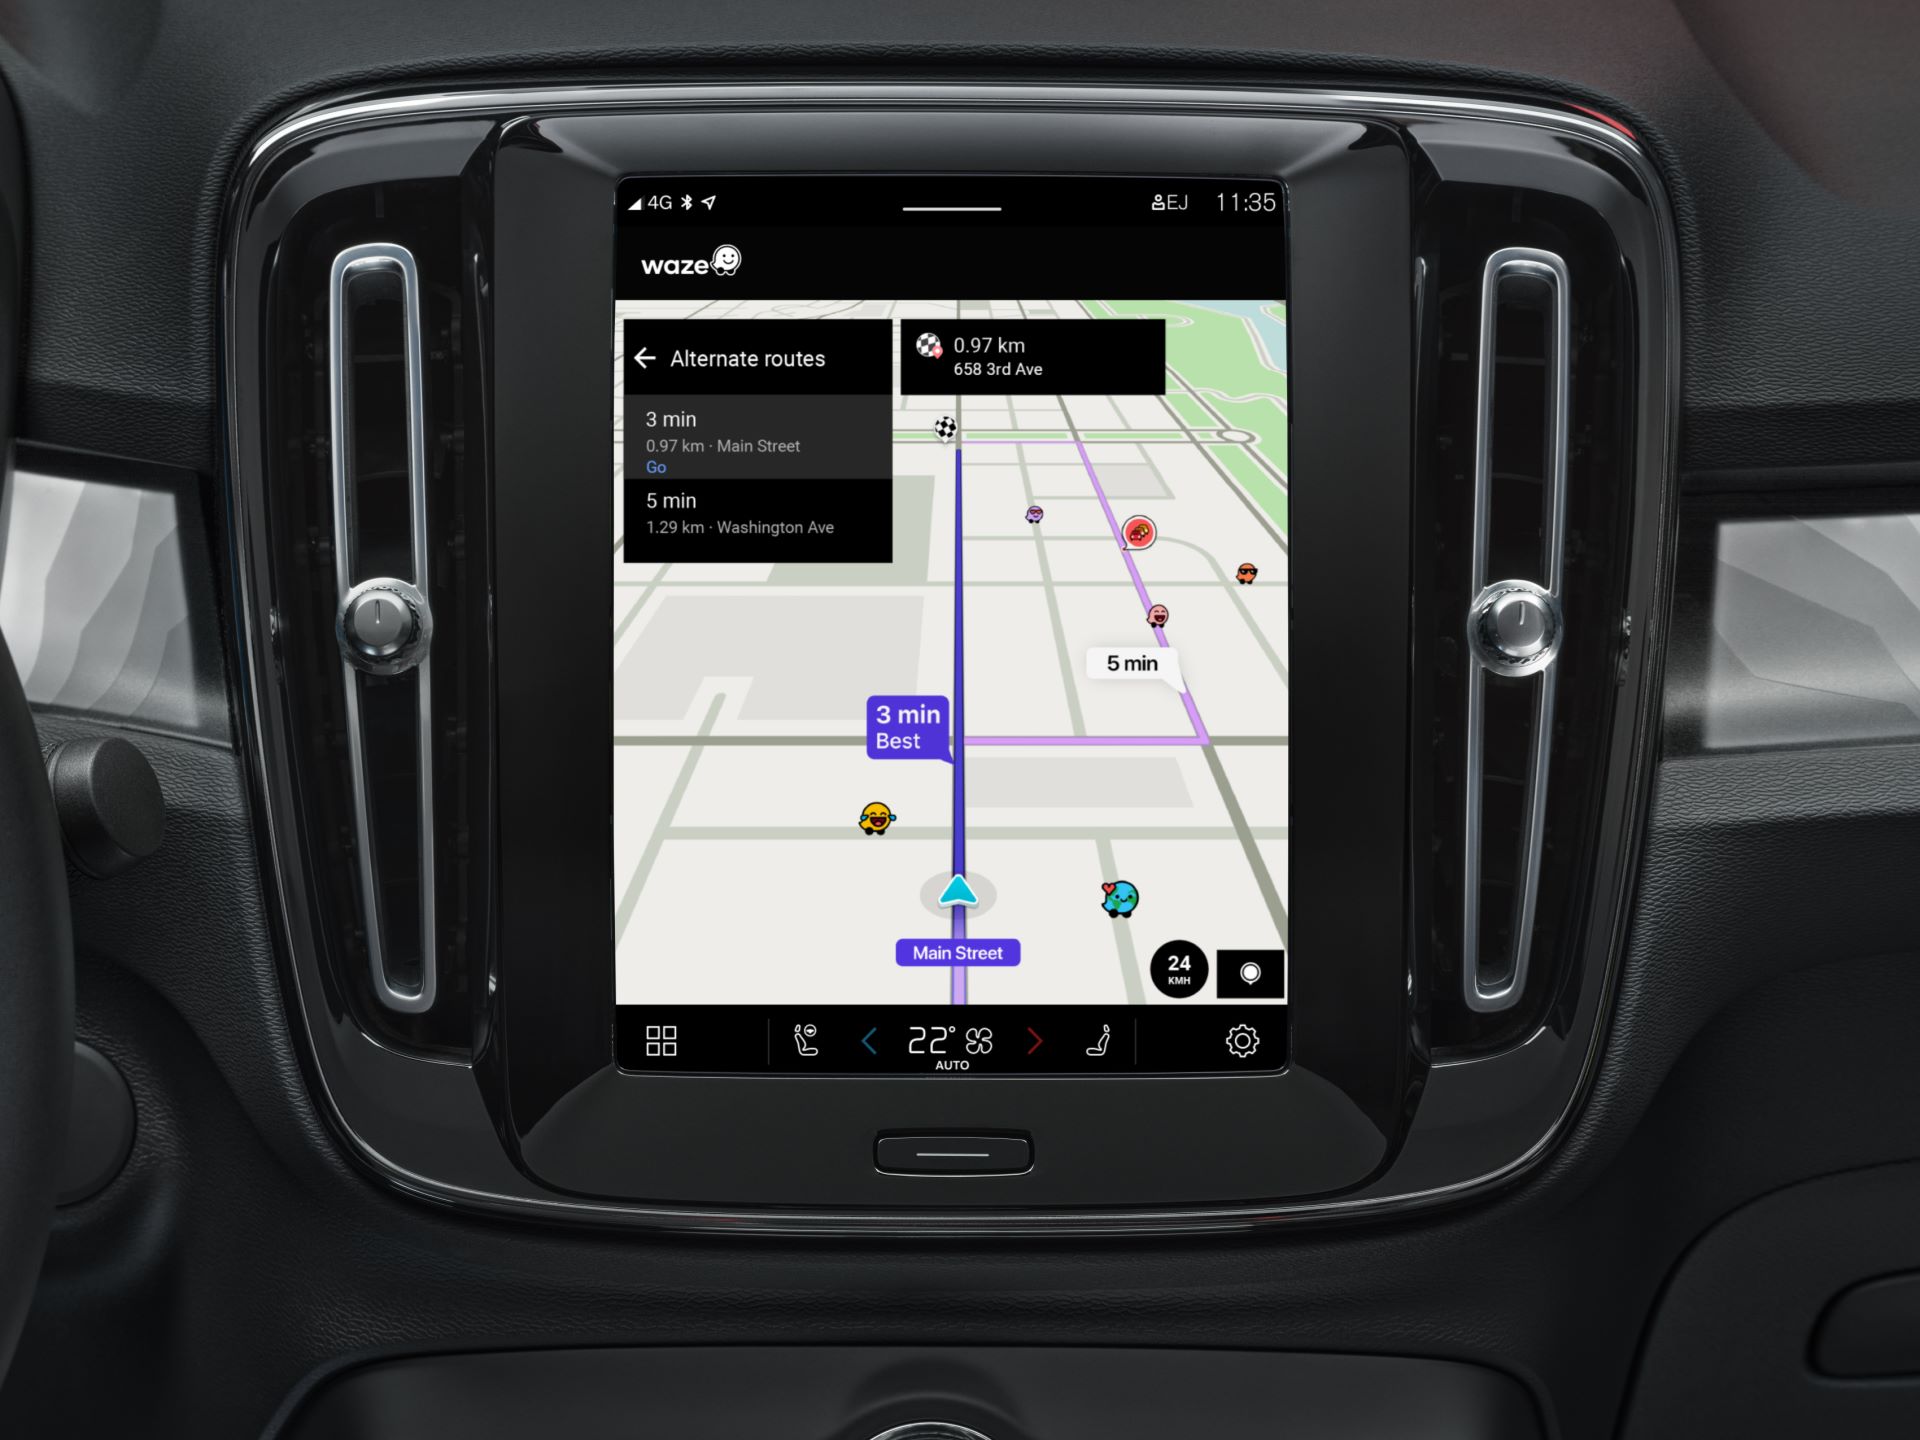 The Waze app open on the infotainment screen of a Volvo car.